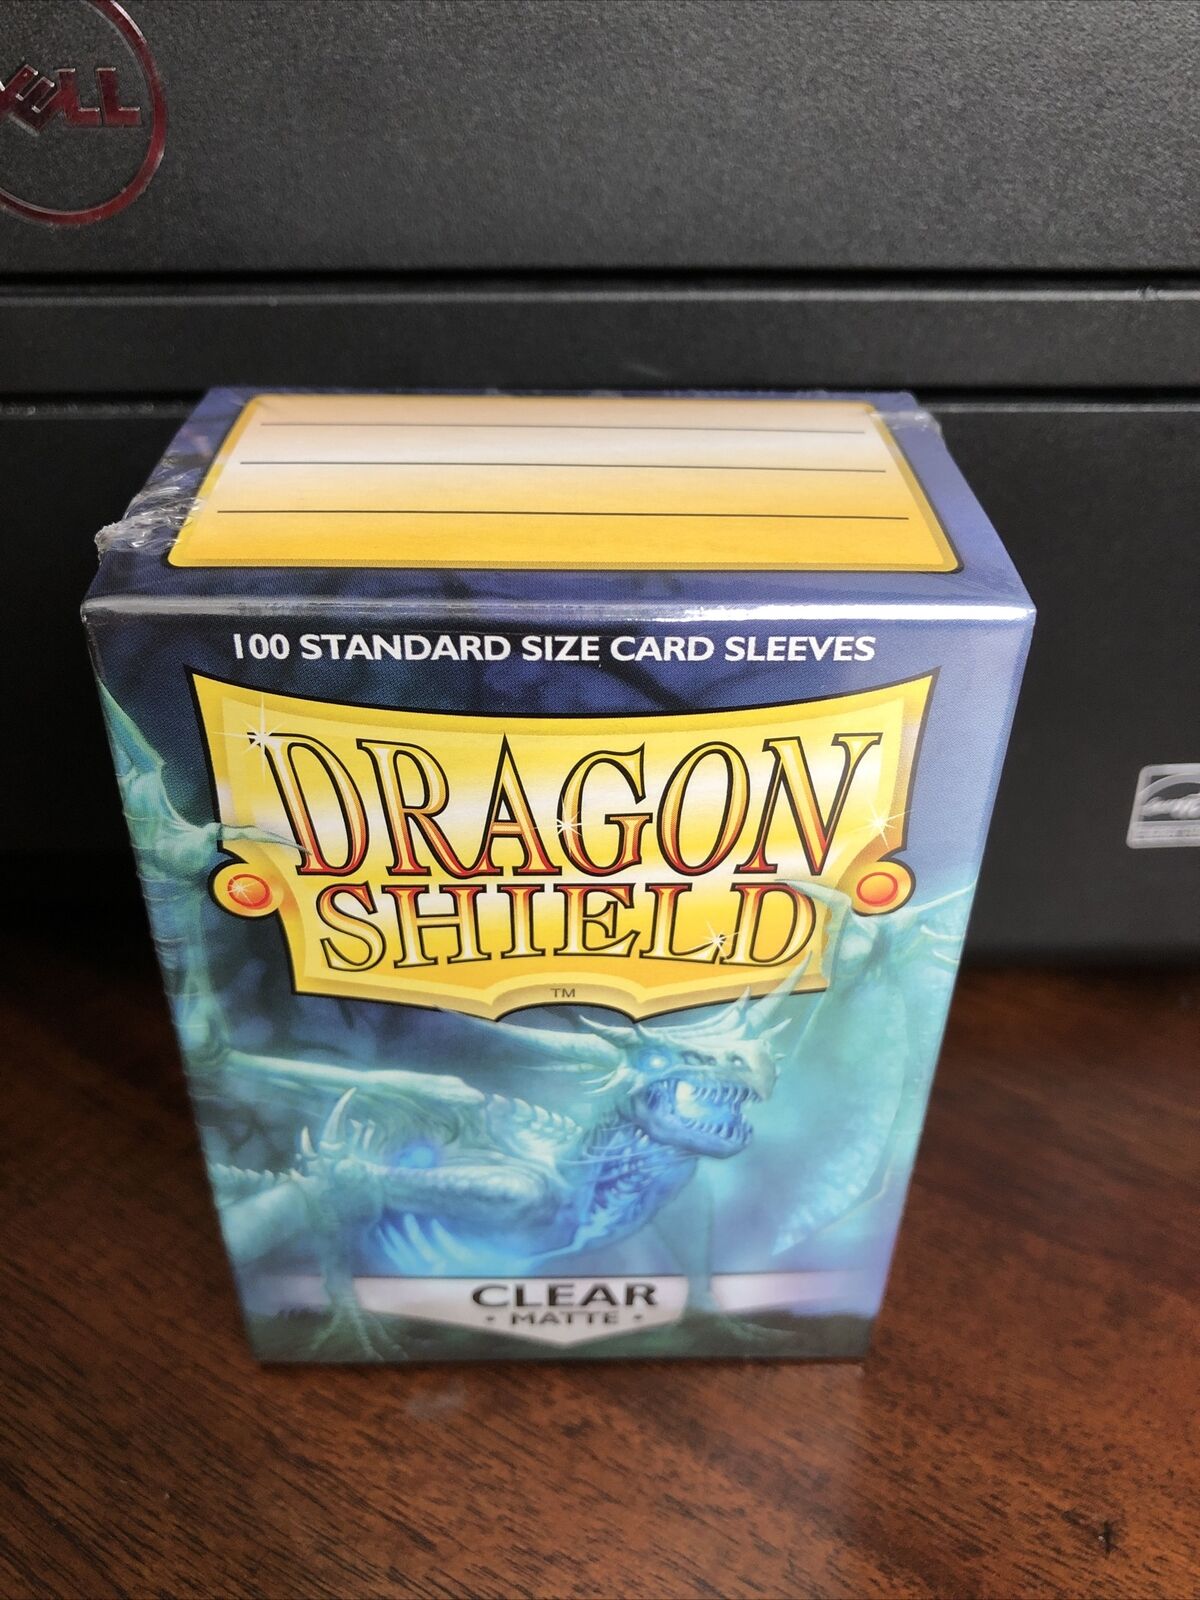 Dragon Shield Sleeves Pack of 100 Standard Size Card Sleeves Clear Matte